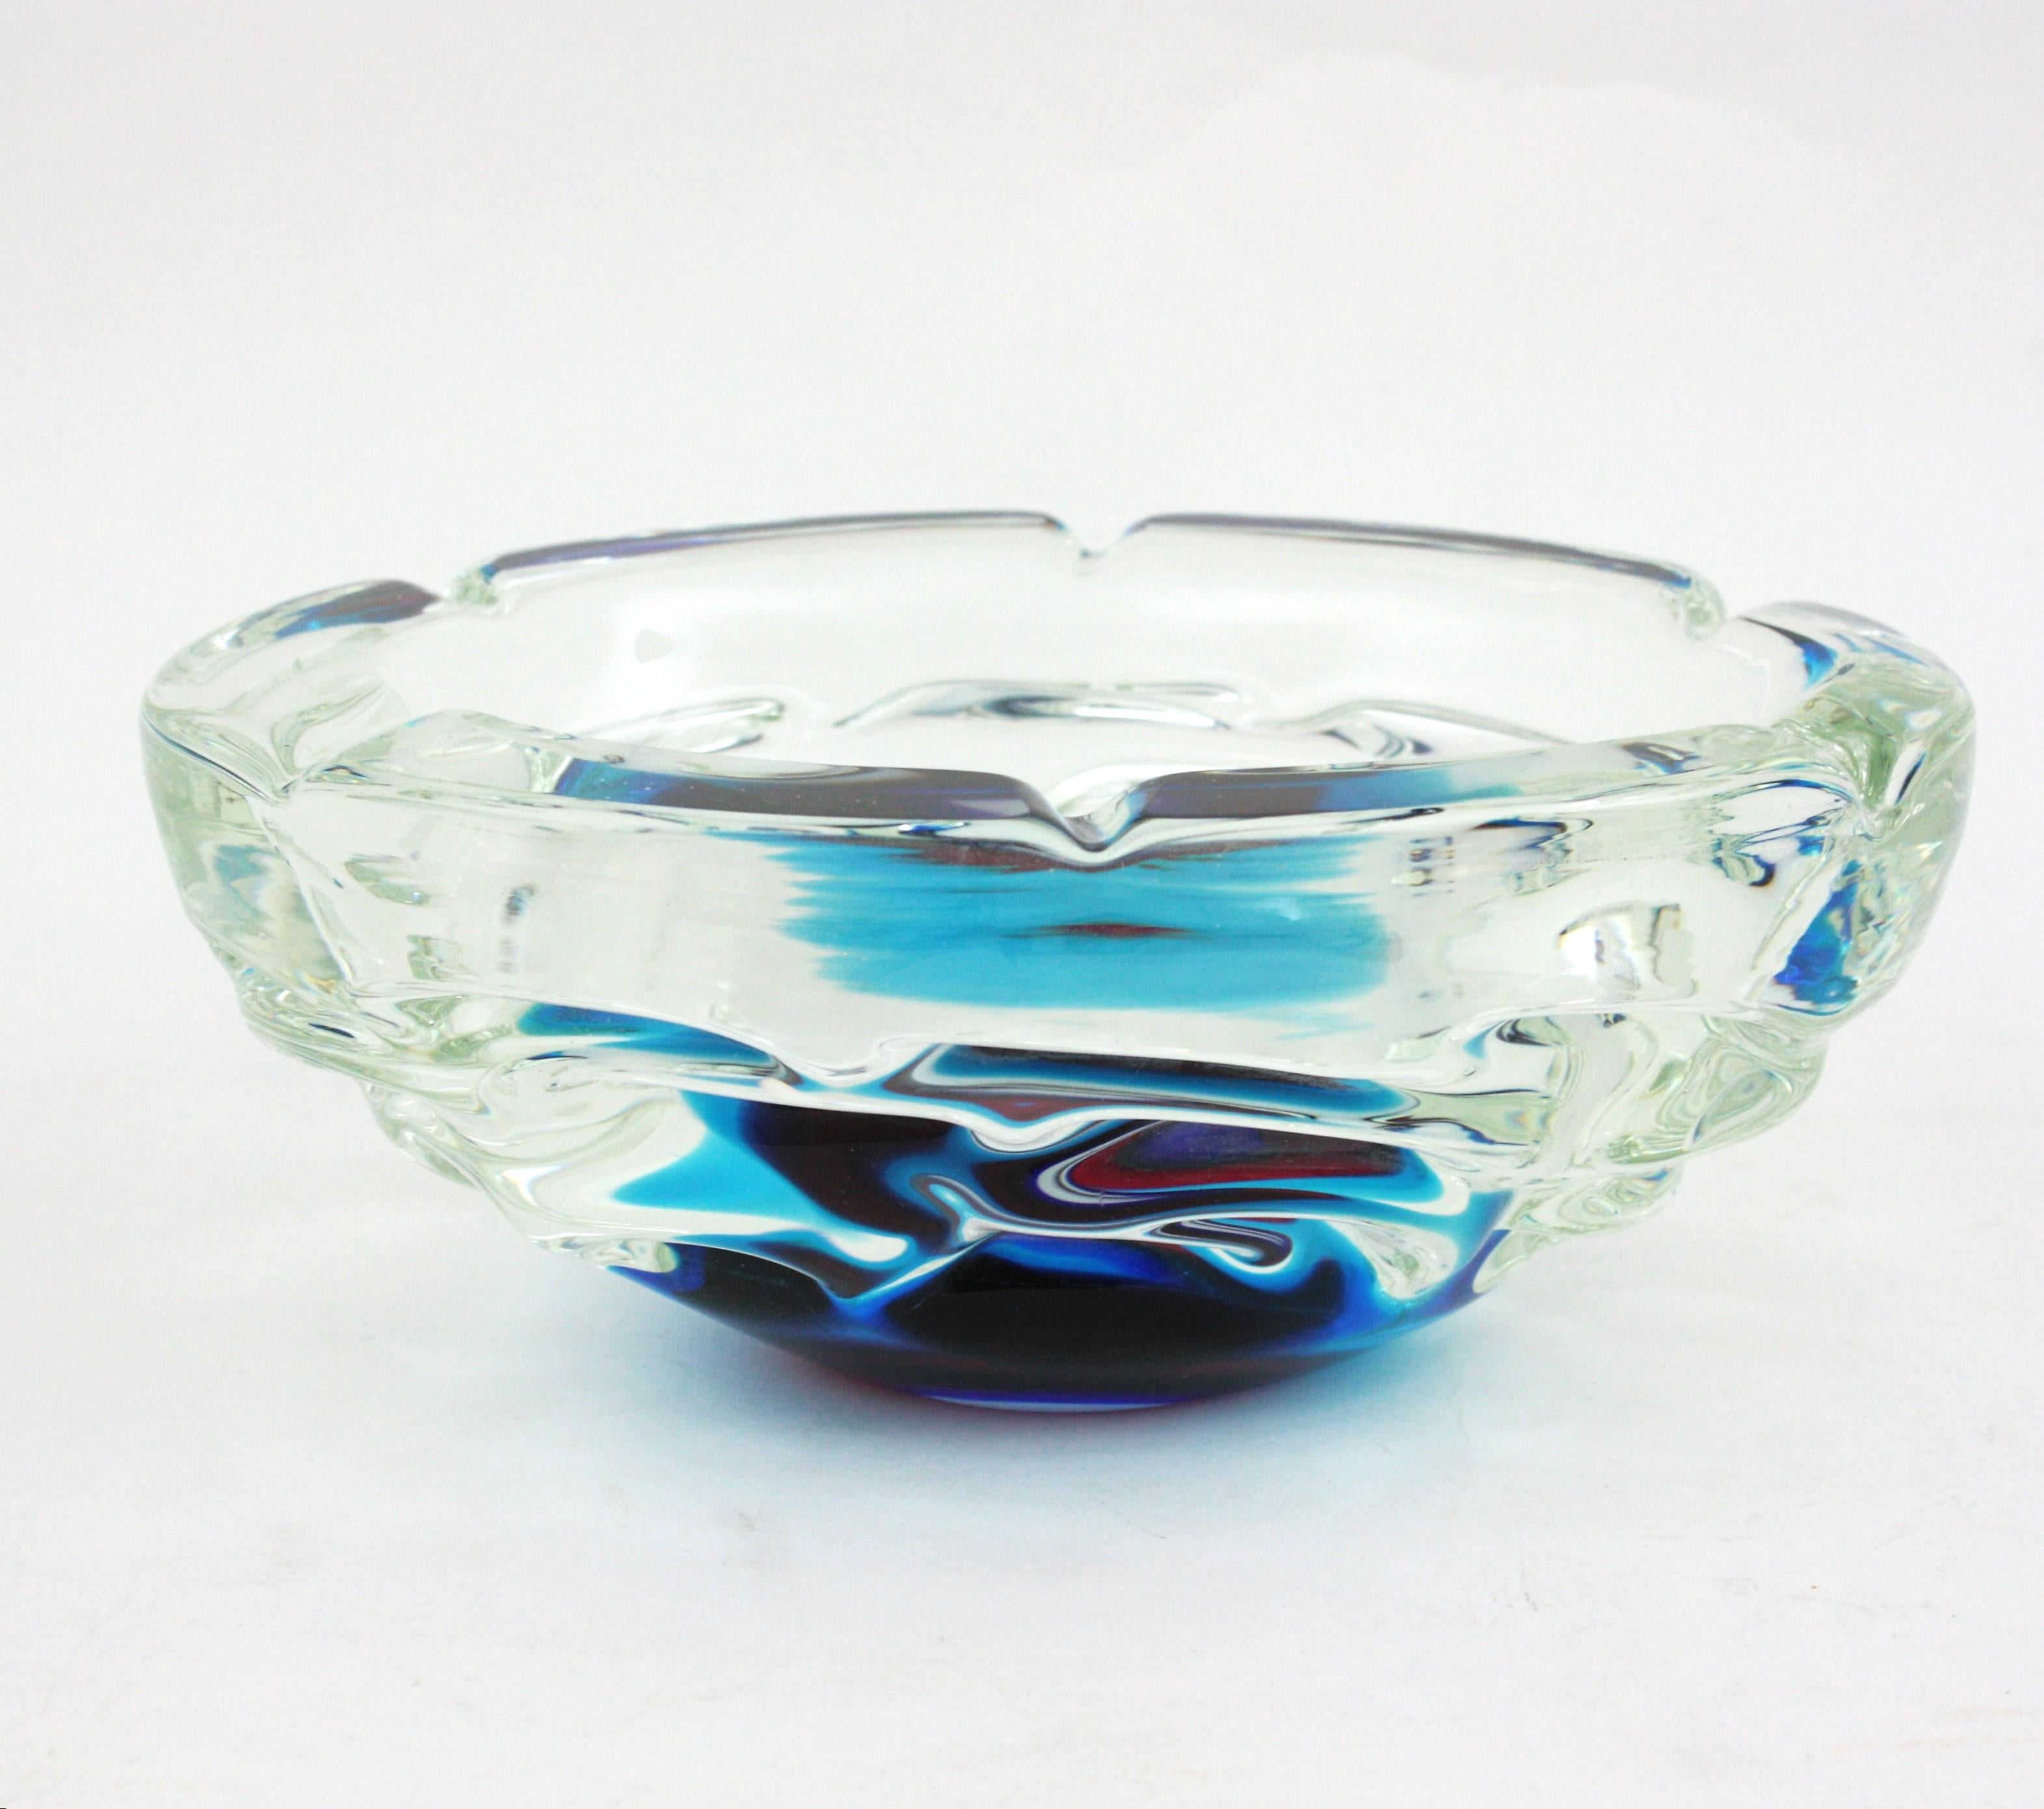 Hand-Crafted Fulvio Bianconi A Fasce Sommerso XL Murano Art Glass Centerpiece Bowl For Sale